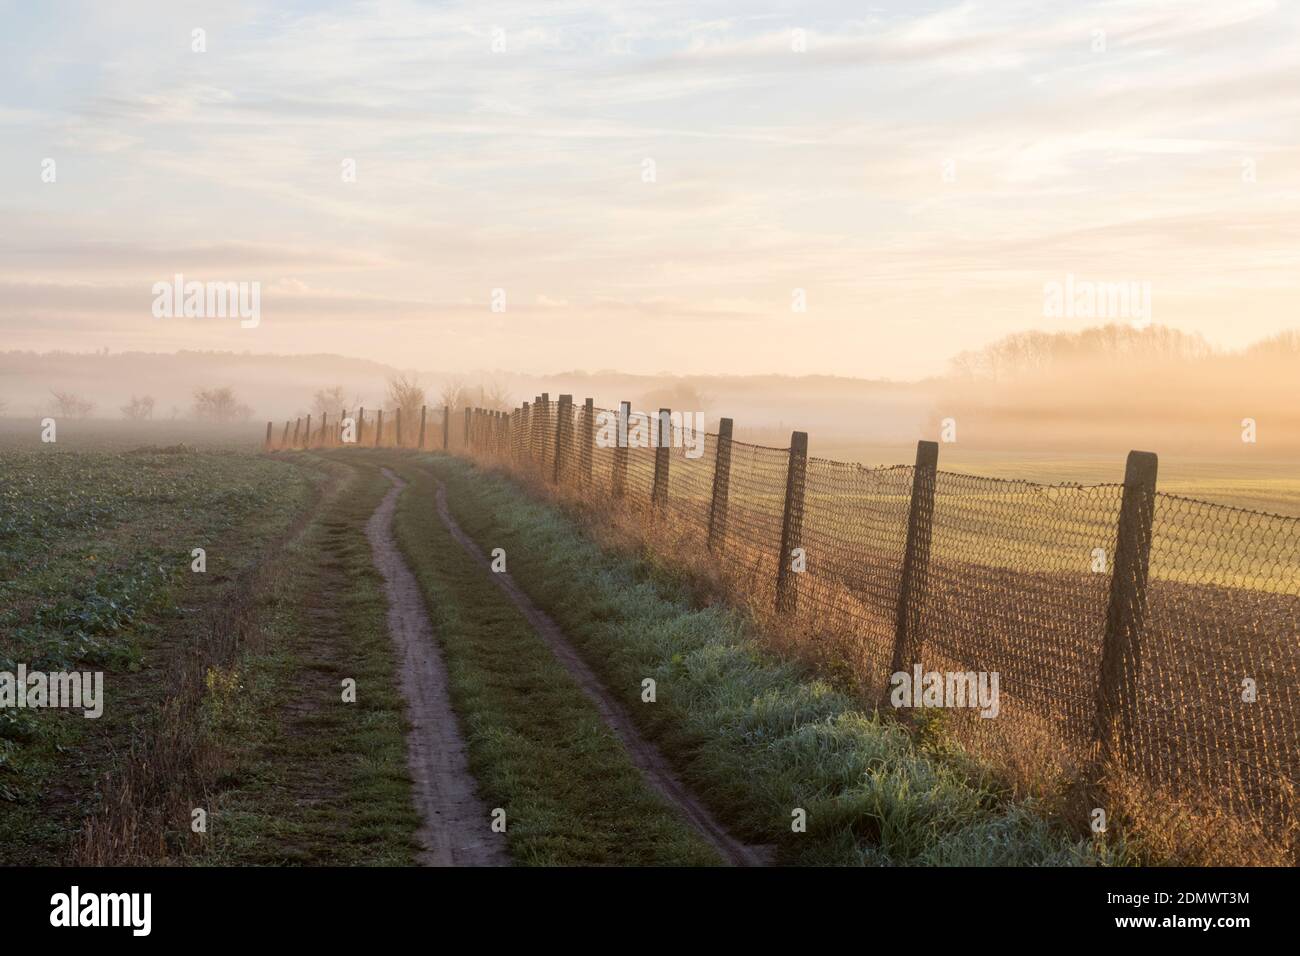 Path next to fence with the mist rising from the fields, Stapleford, Cambridge, UK Stock Photo